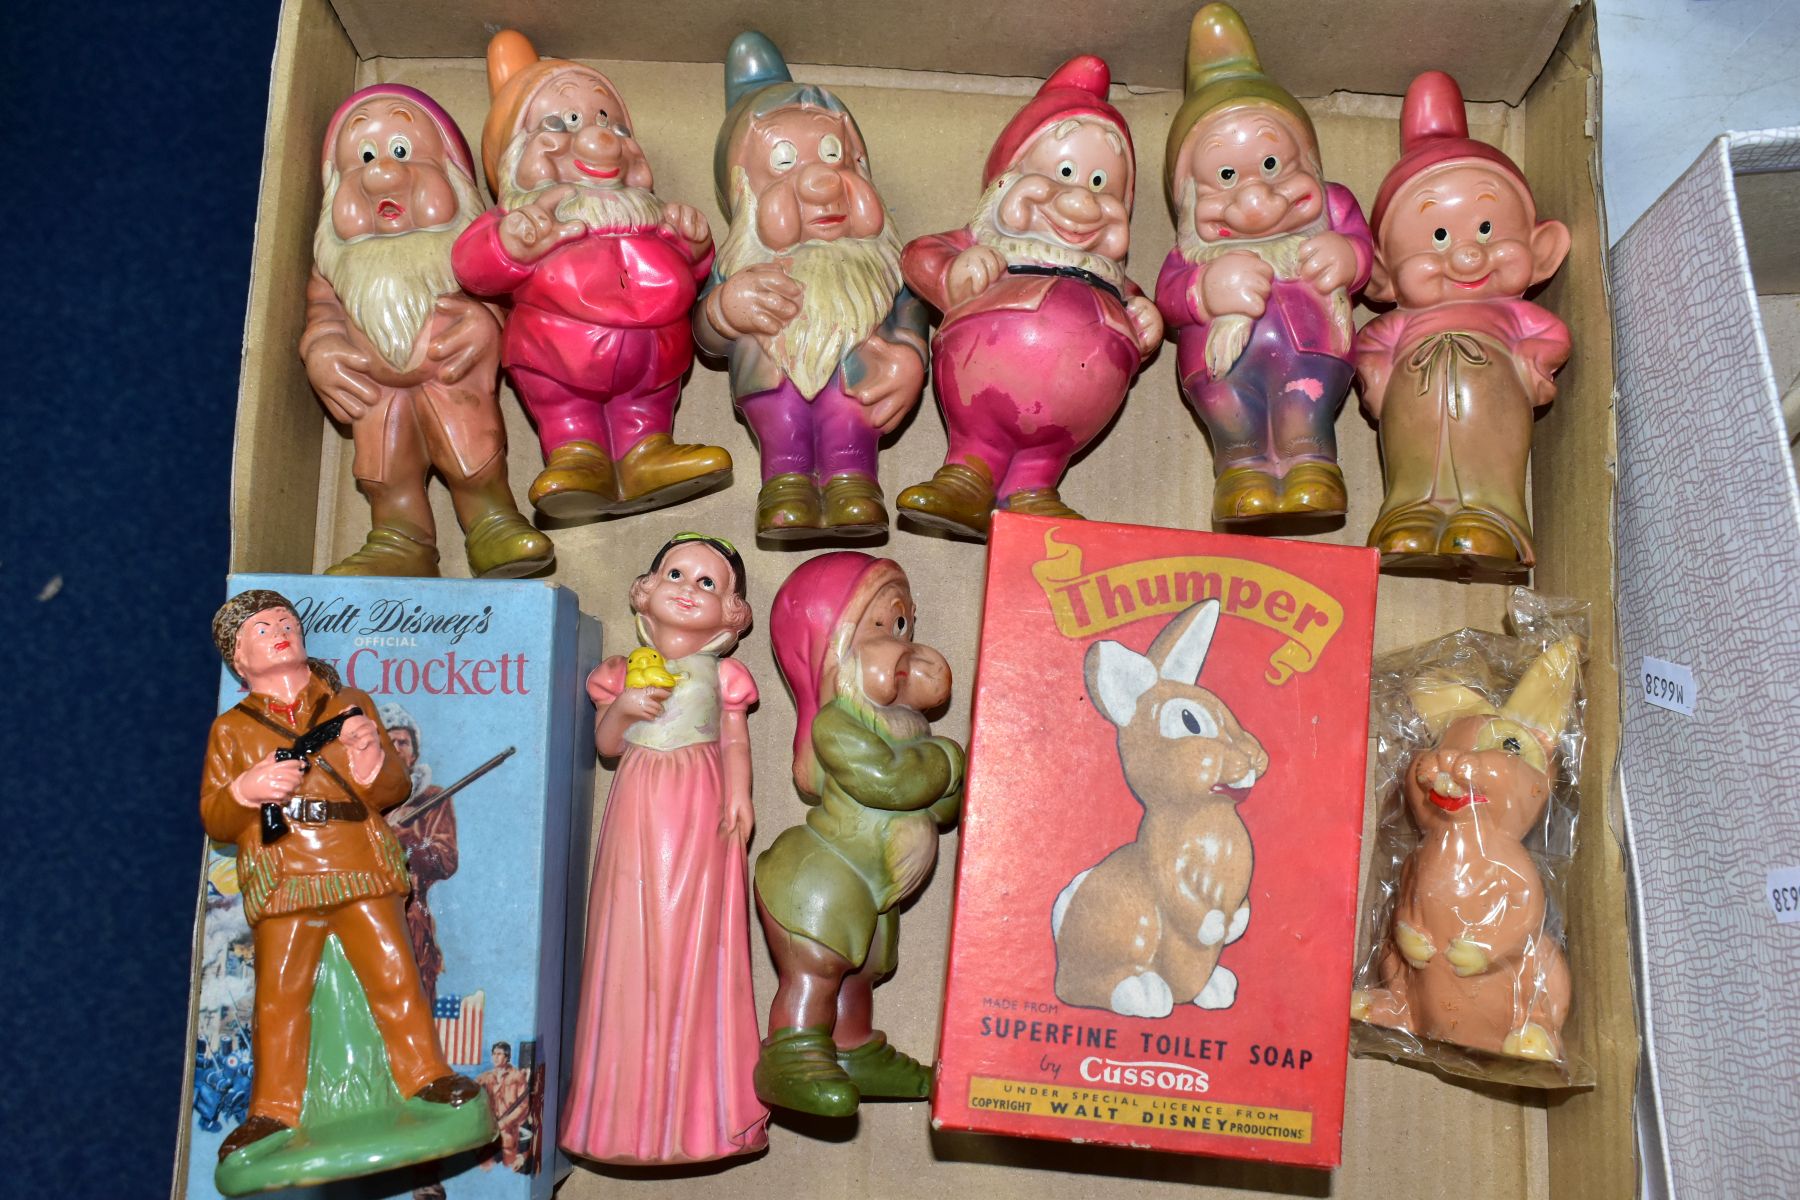 VINTAGE JAPANESE CELLULOID SNOW WHITE AND THE SEVEN DWARFS FIGURES, hand painted, approximate height